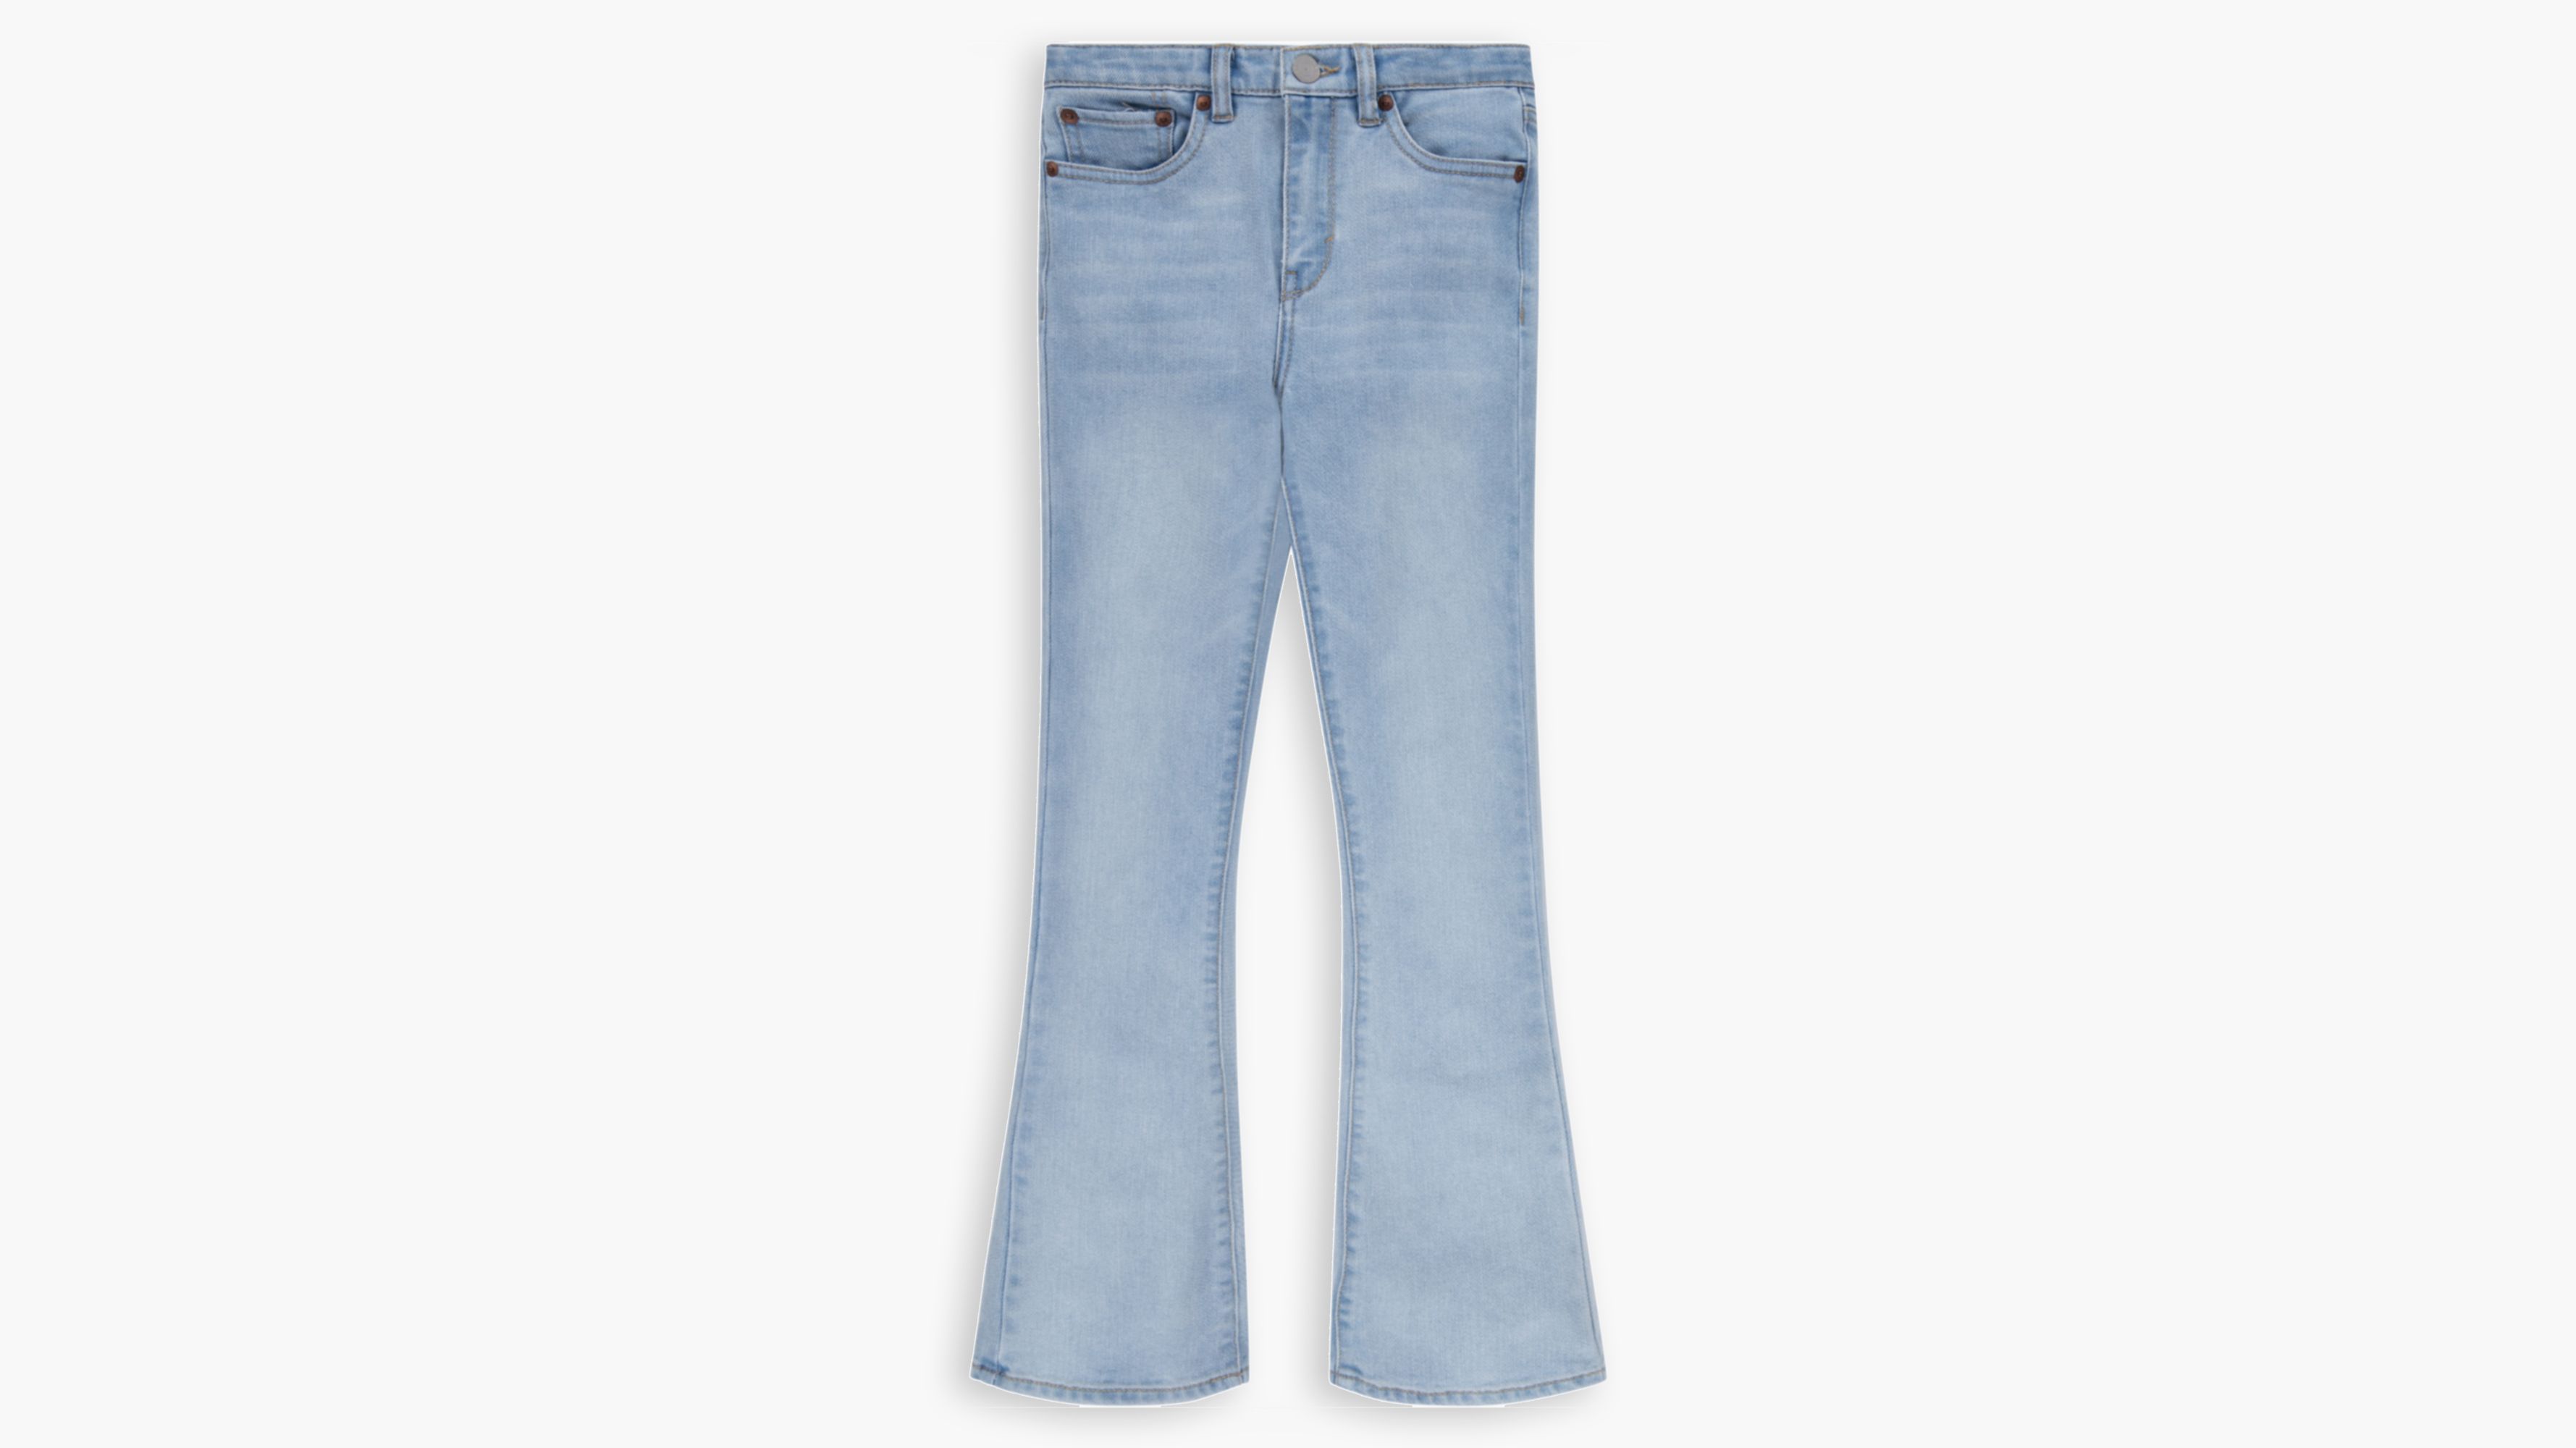 Youth Girls' Flare Jeans